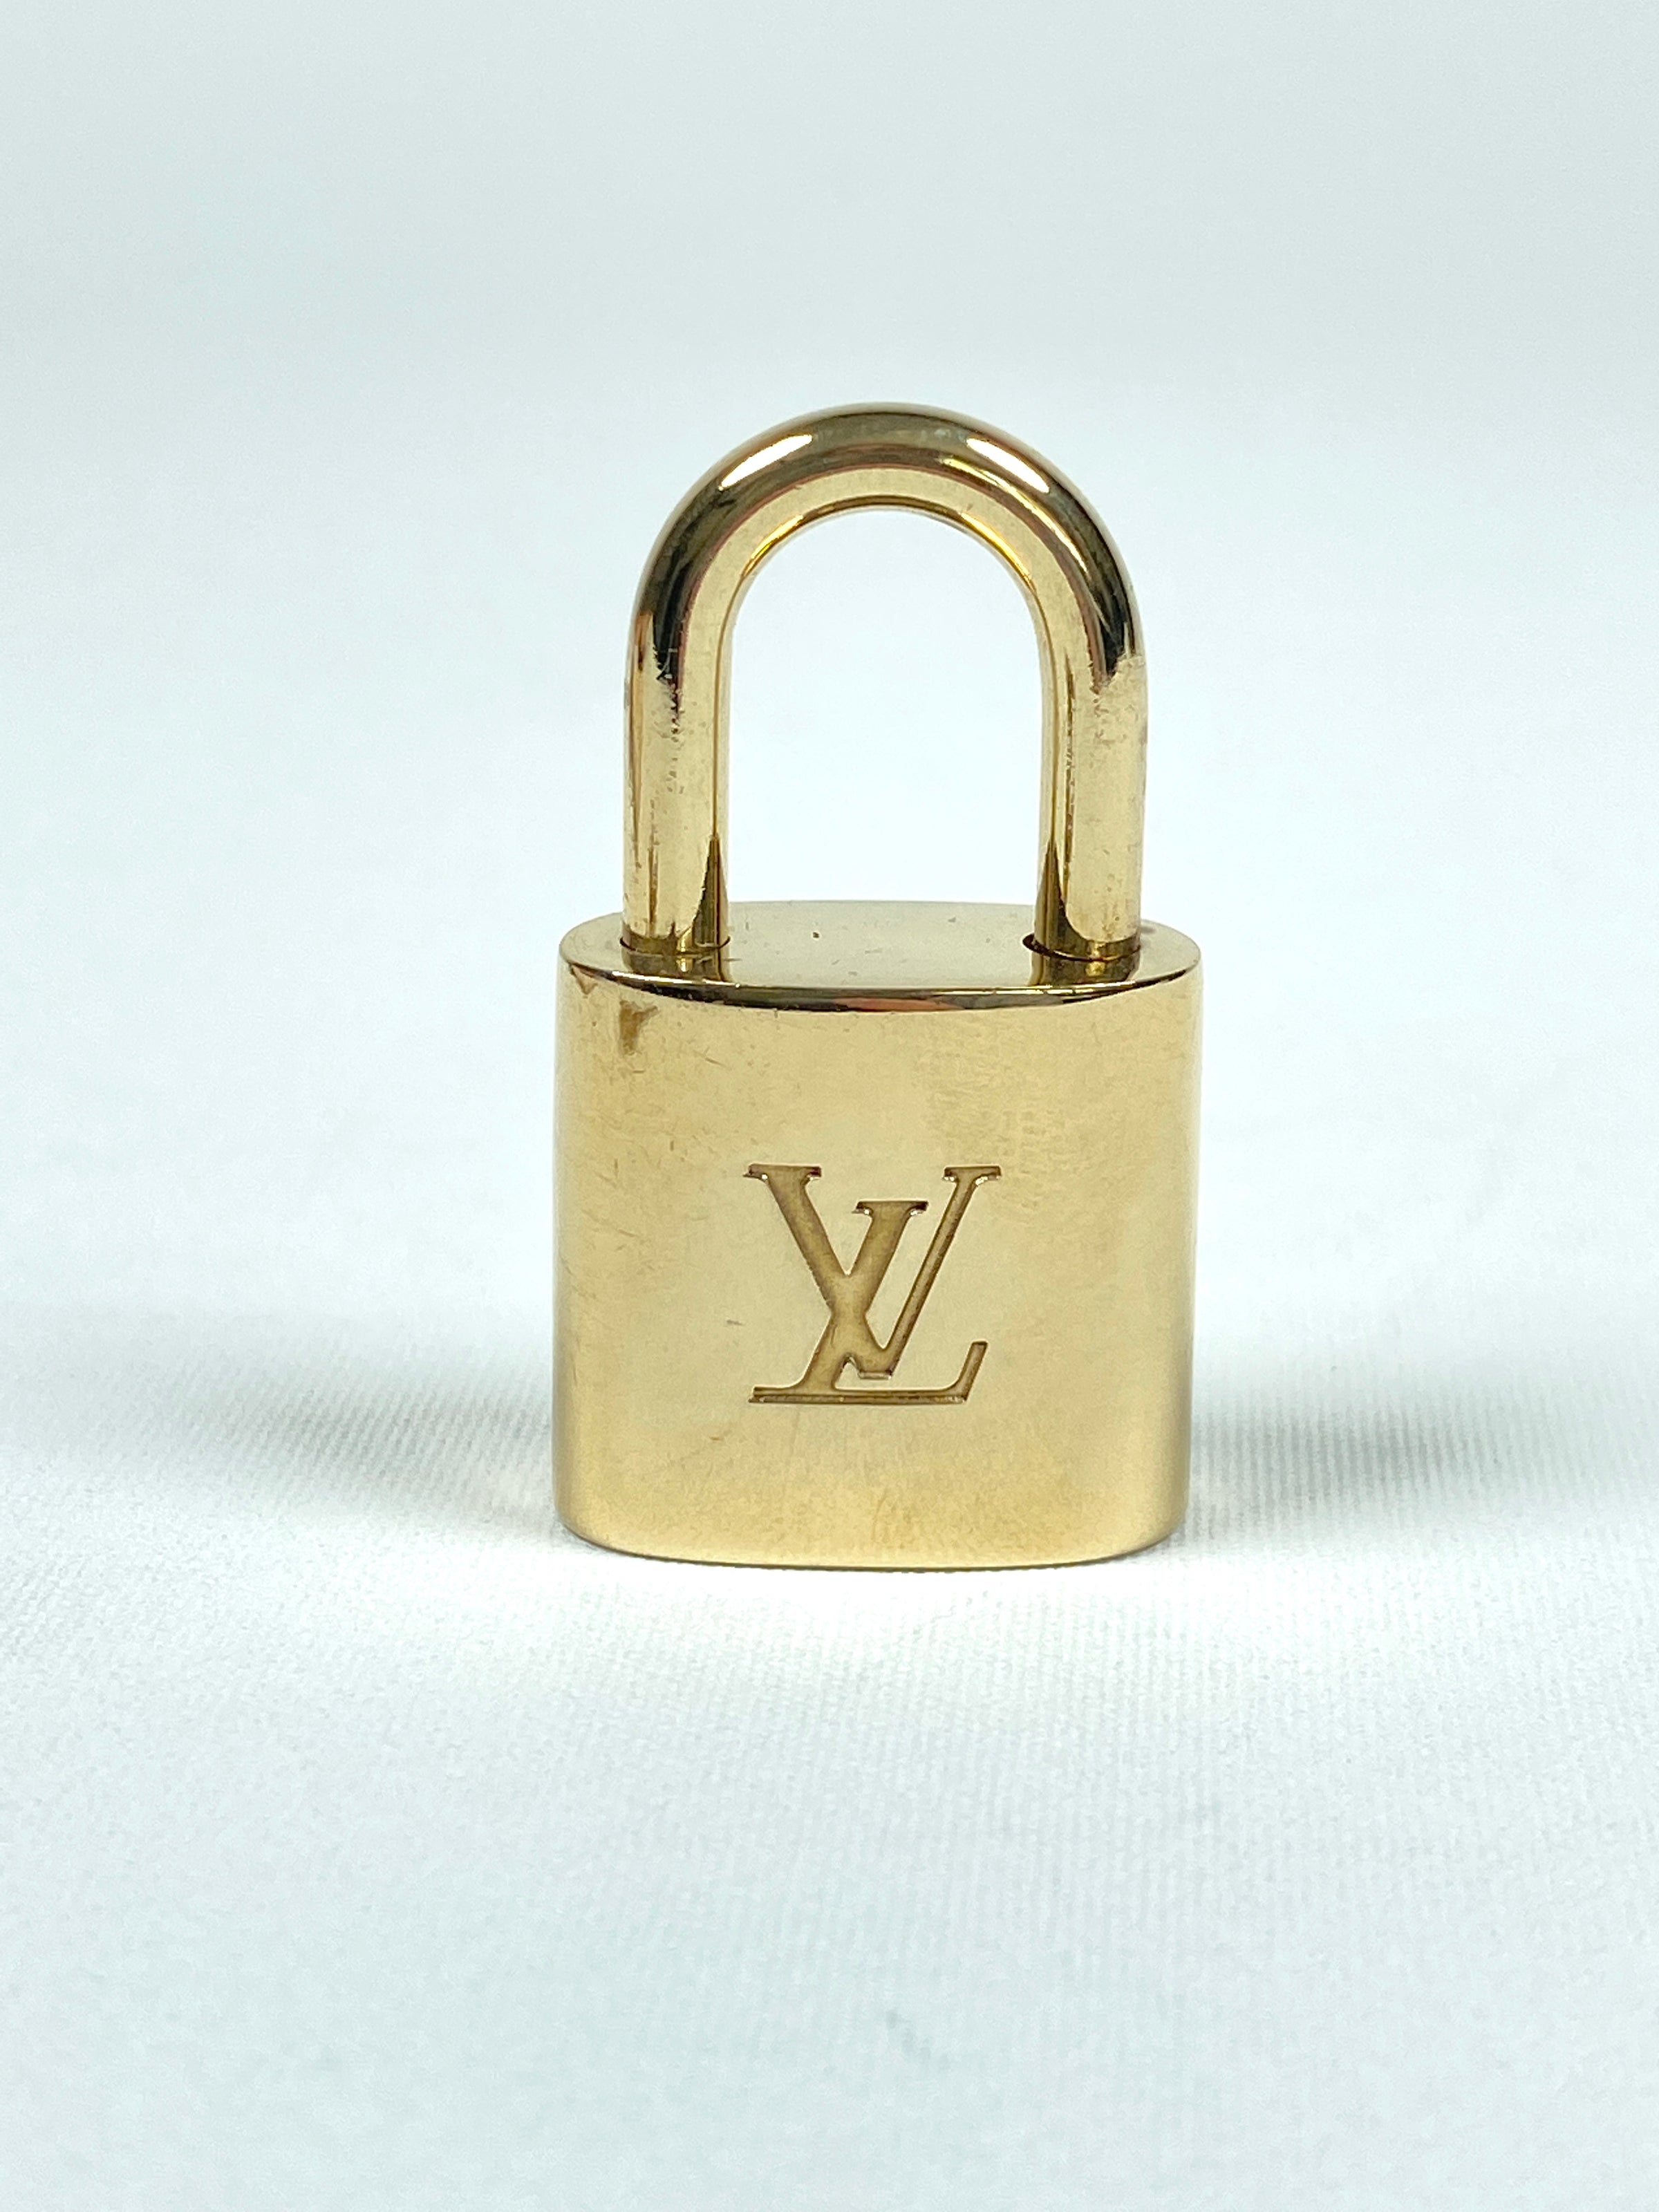 Louis Vuitton Lock And Key Set #312 on Necklace and Bracelet